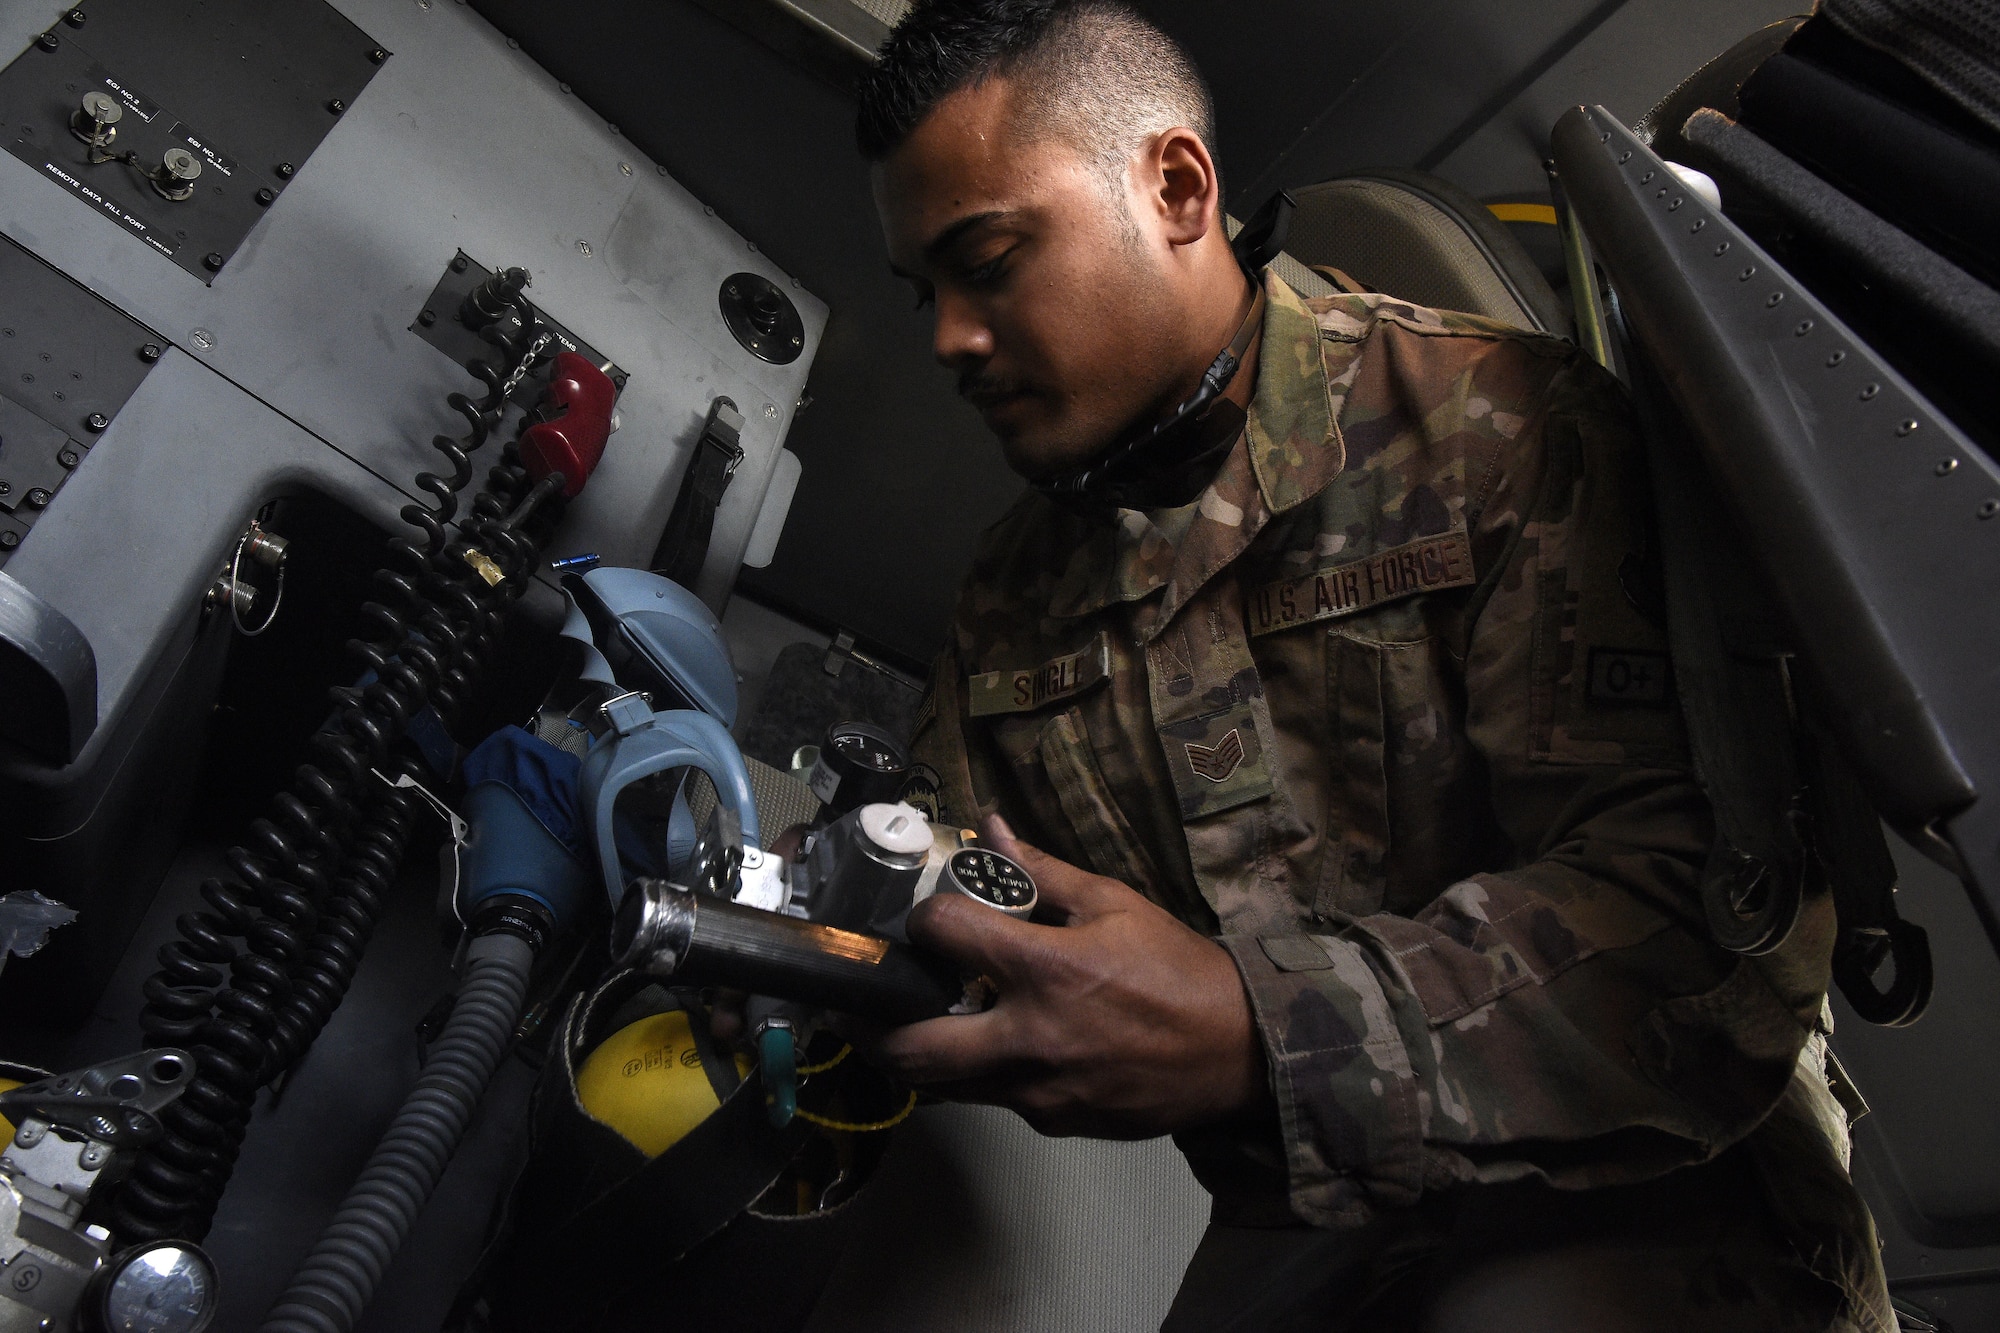 Staff Sgt. Anthony Single, 455th Expeditionary Aircraft Maintenance Squadron C-130J Super Hercules crew chief, inspects an oxygen mask Dec. 5, 2017 at Bagram Airfield, Afghanistan.